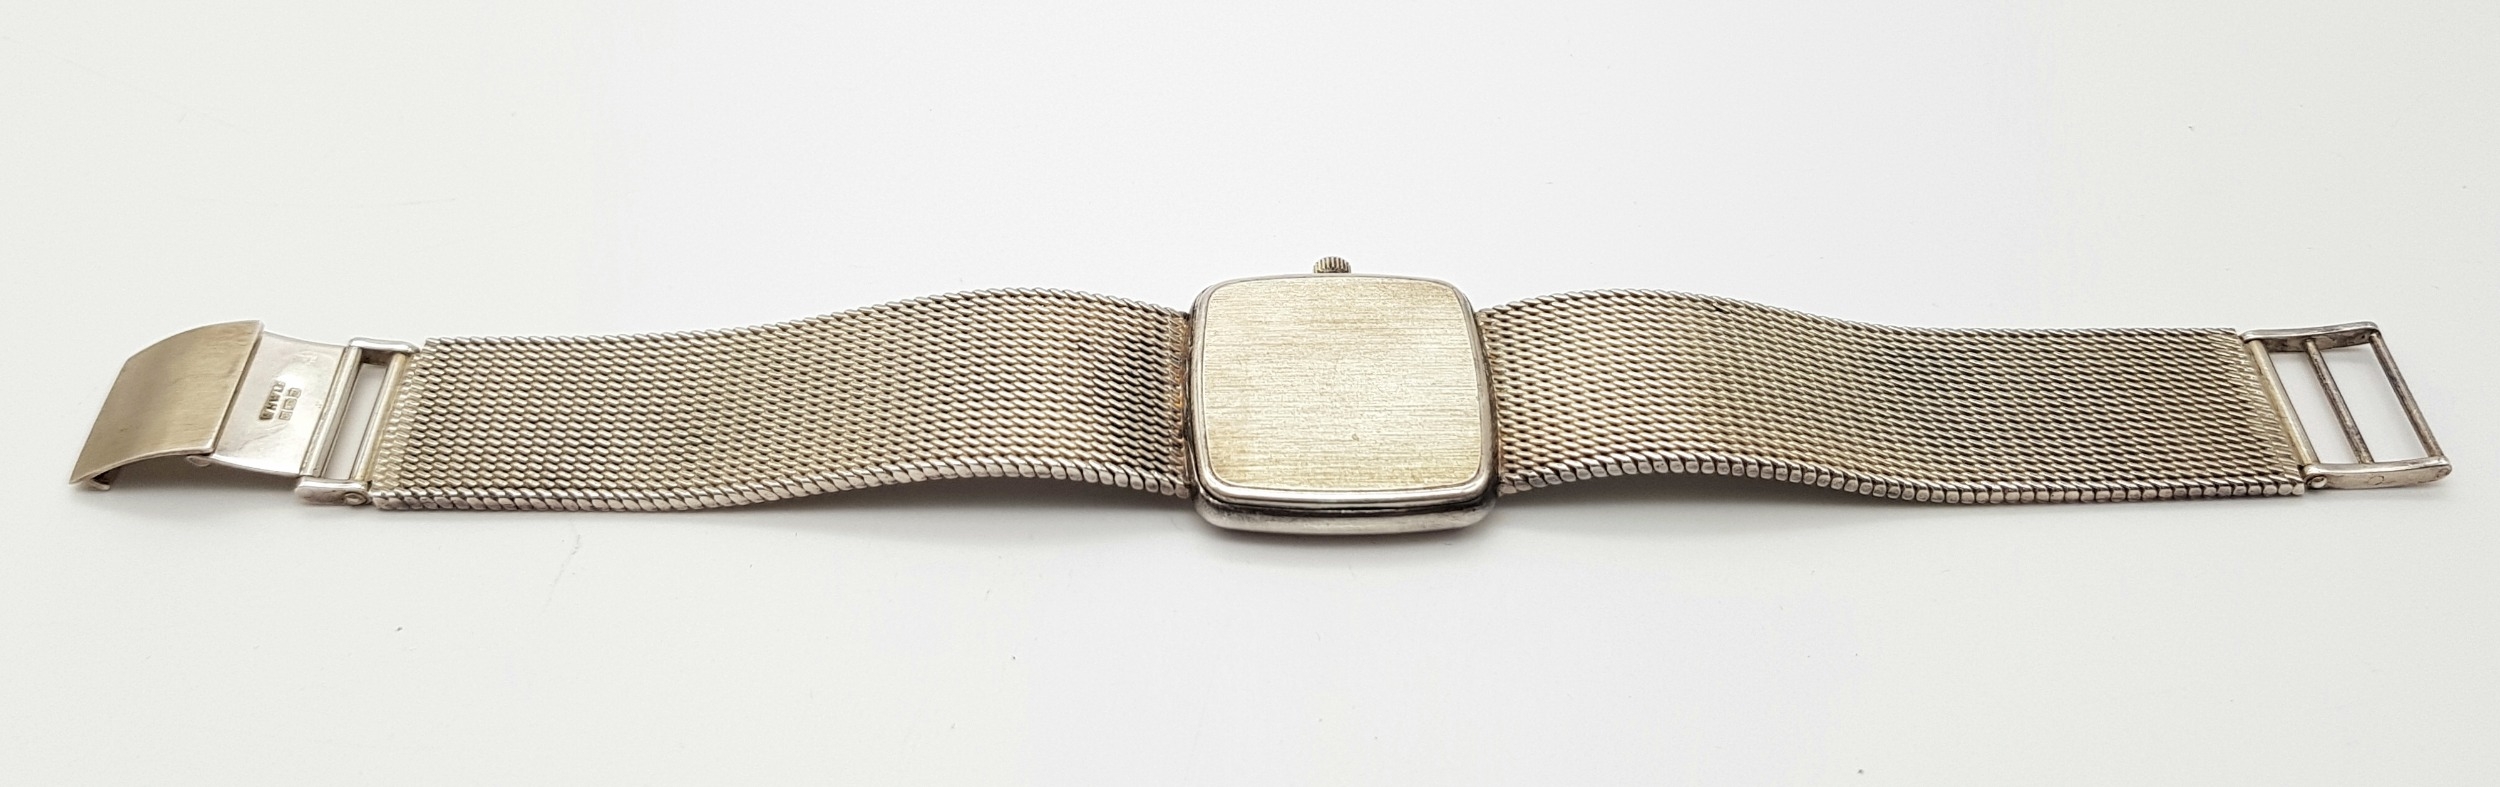 A Rare Garrard Sterling Silver Gents Quartz Watch. Sterling silver bracelet and case - 29mm. White - Image 7 of 8